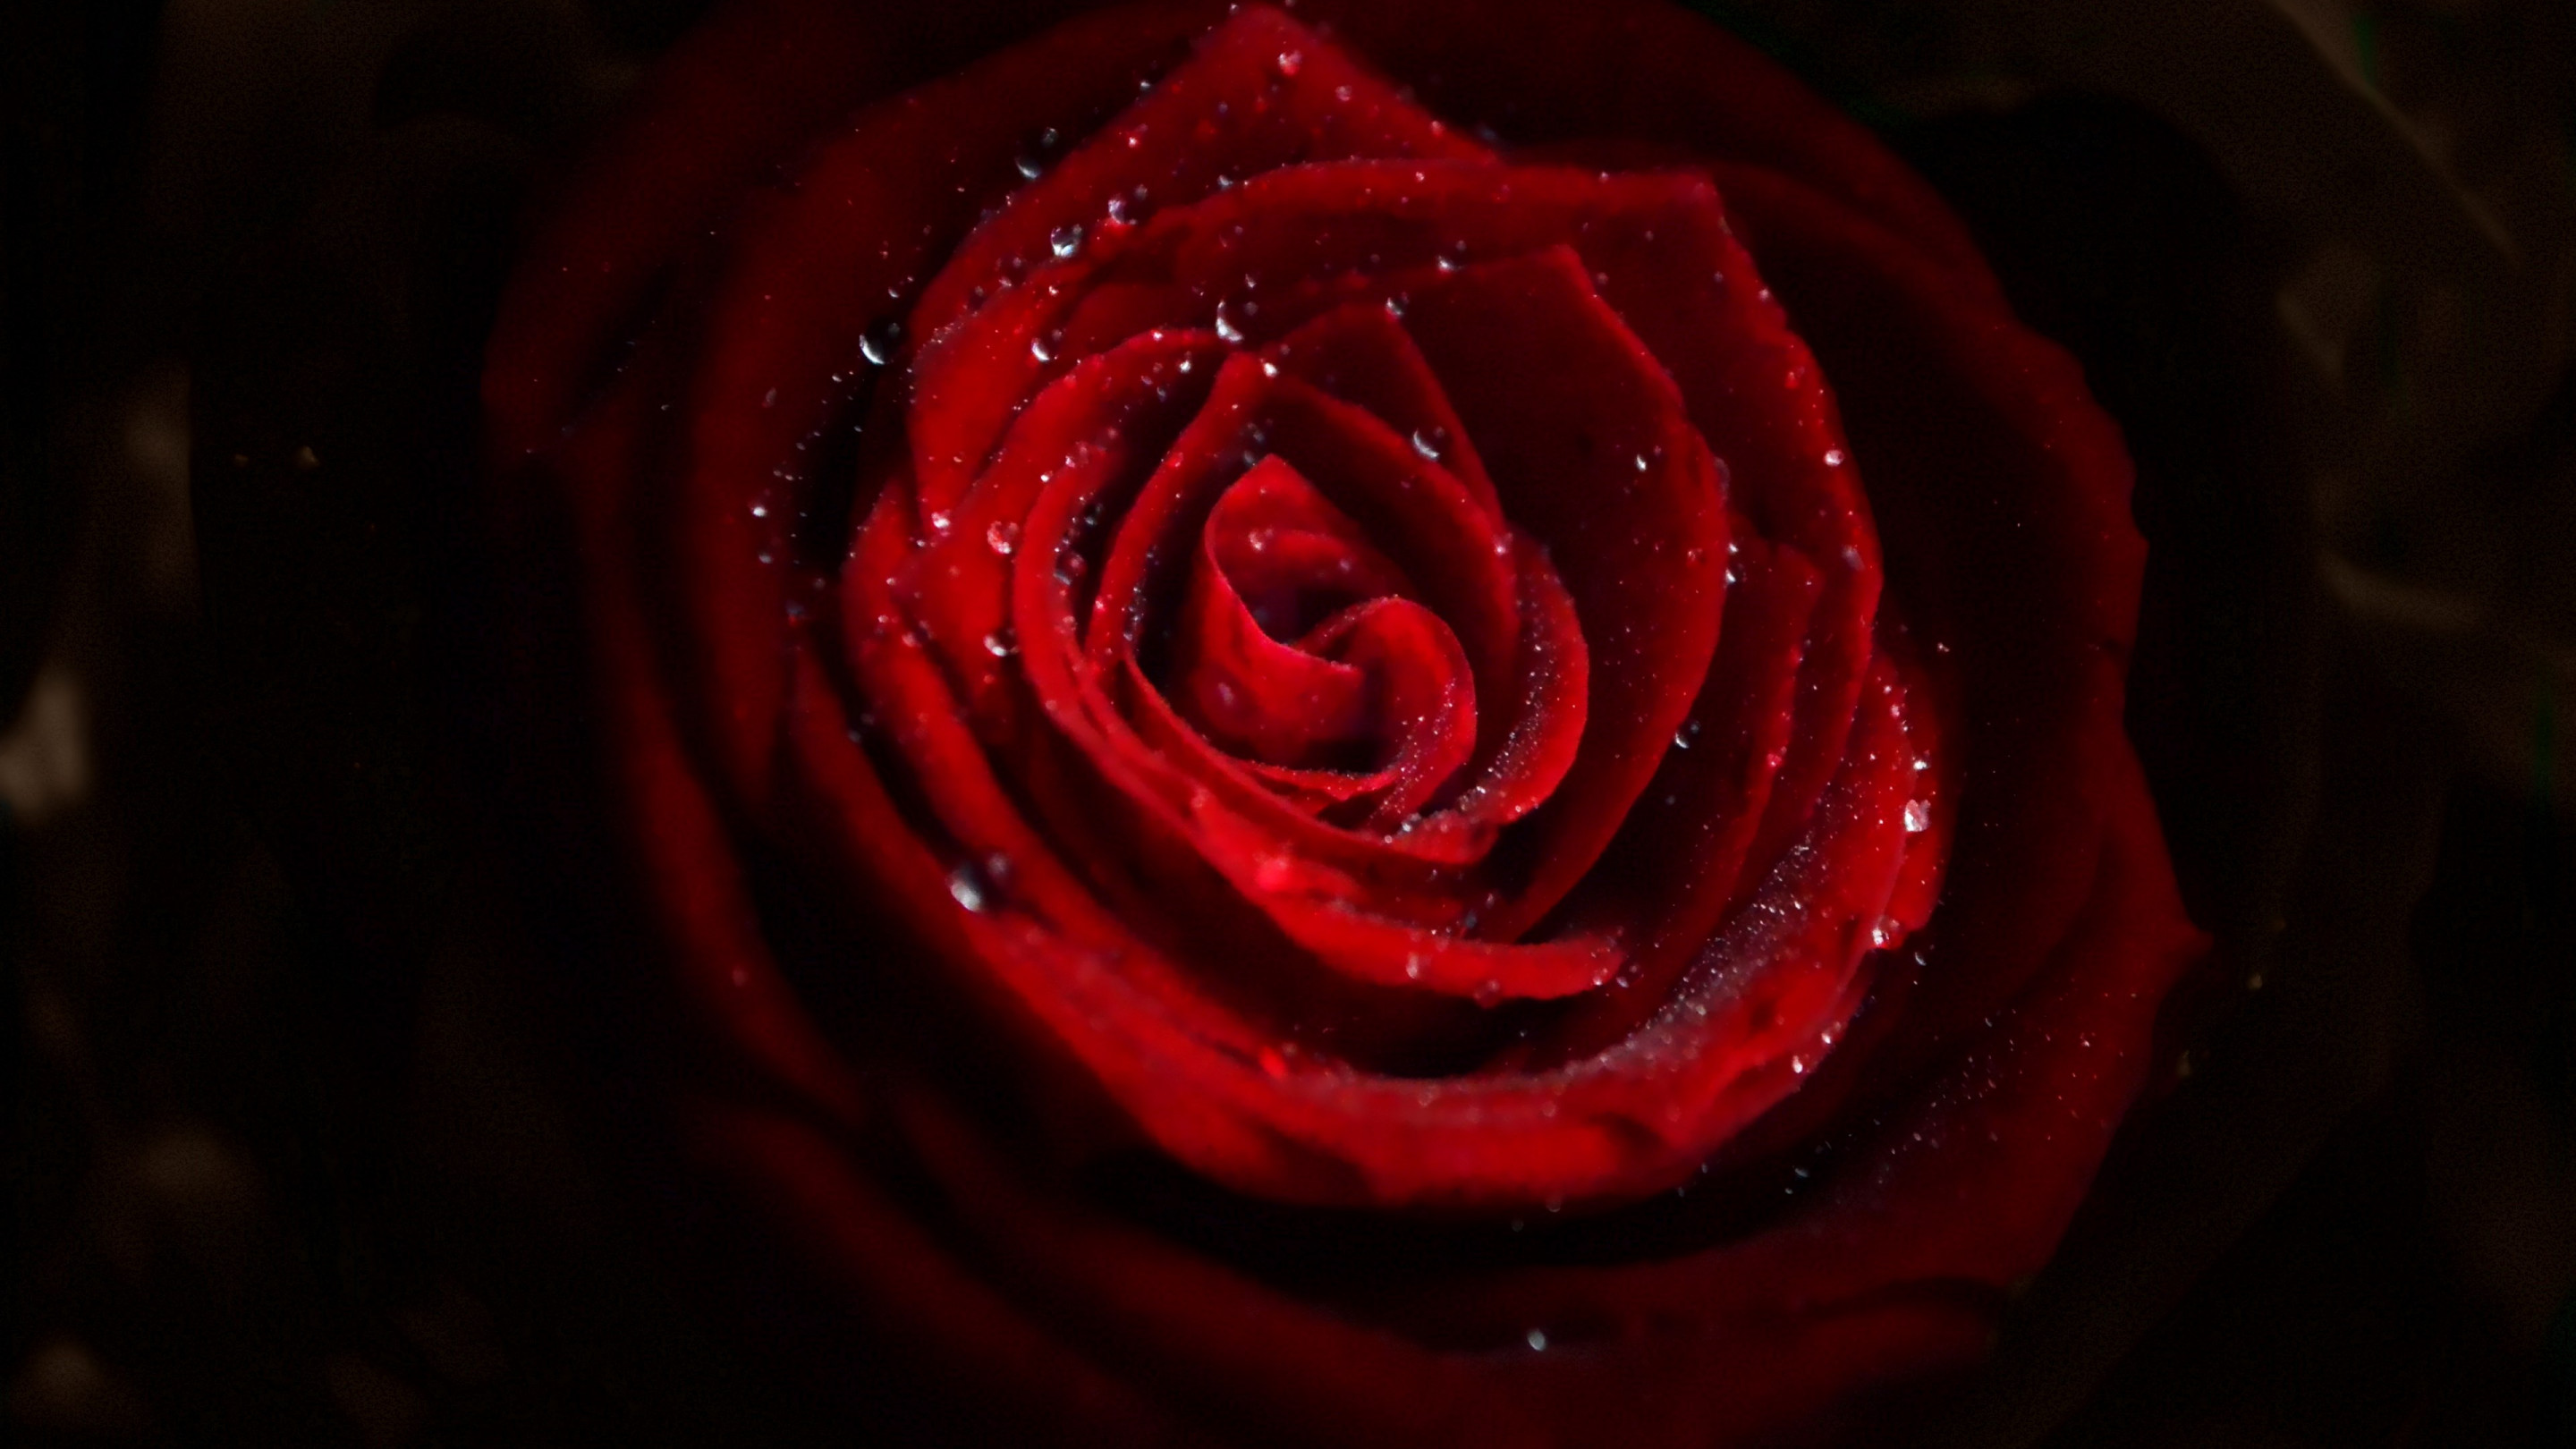 Water drops on red rose wallpaper 2880x1620